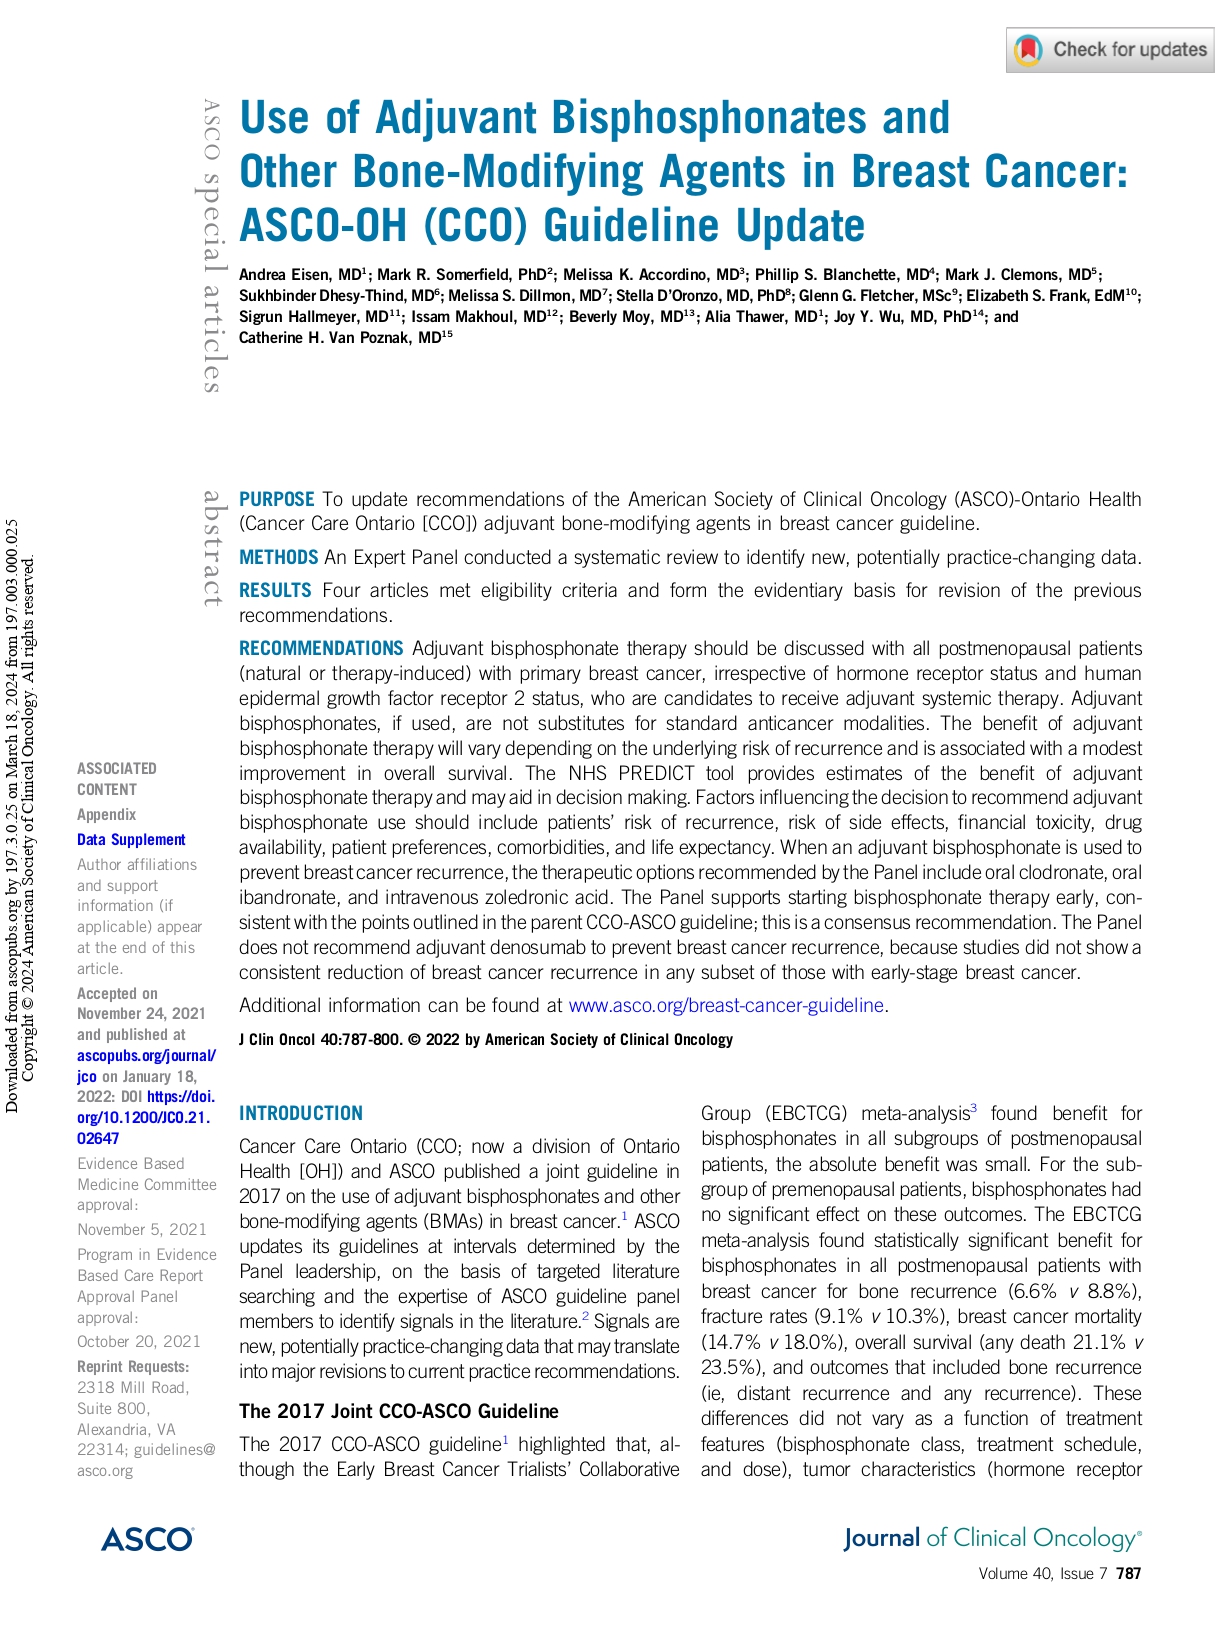 Use of Adjuvant Bisphosphonates and Other Bone-Modifying Agents in Breast Cancer: ASCO-OH (CCO) Guideline Update (2022)